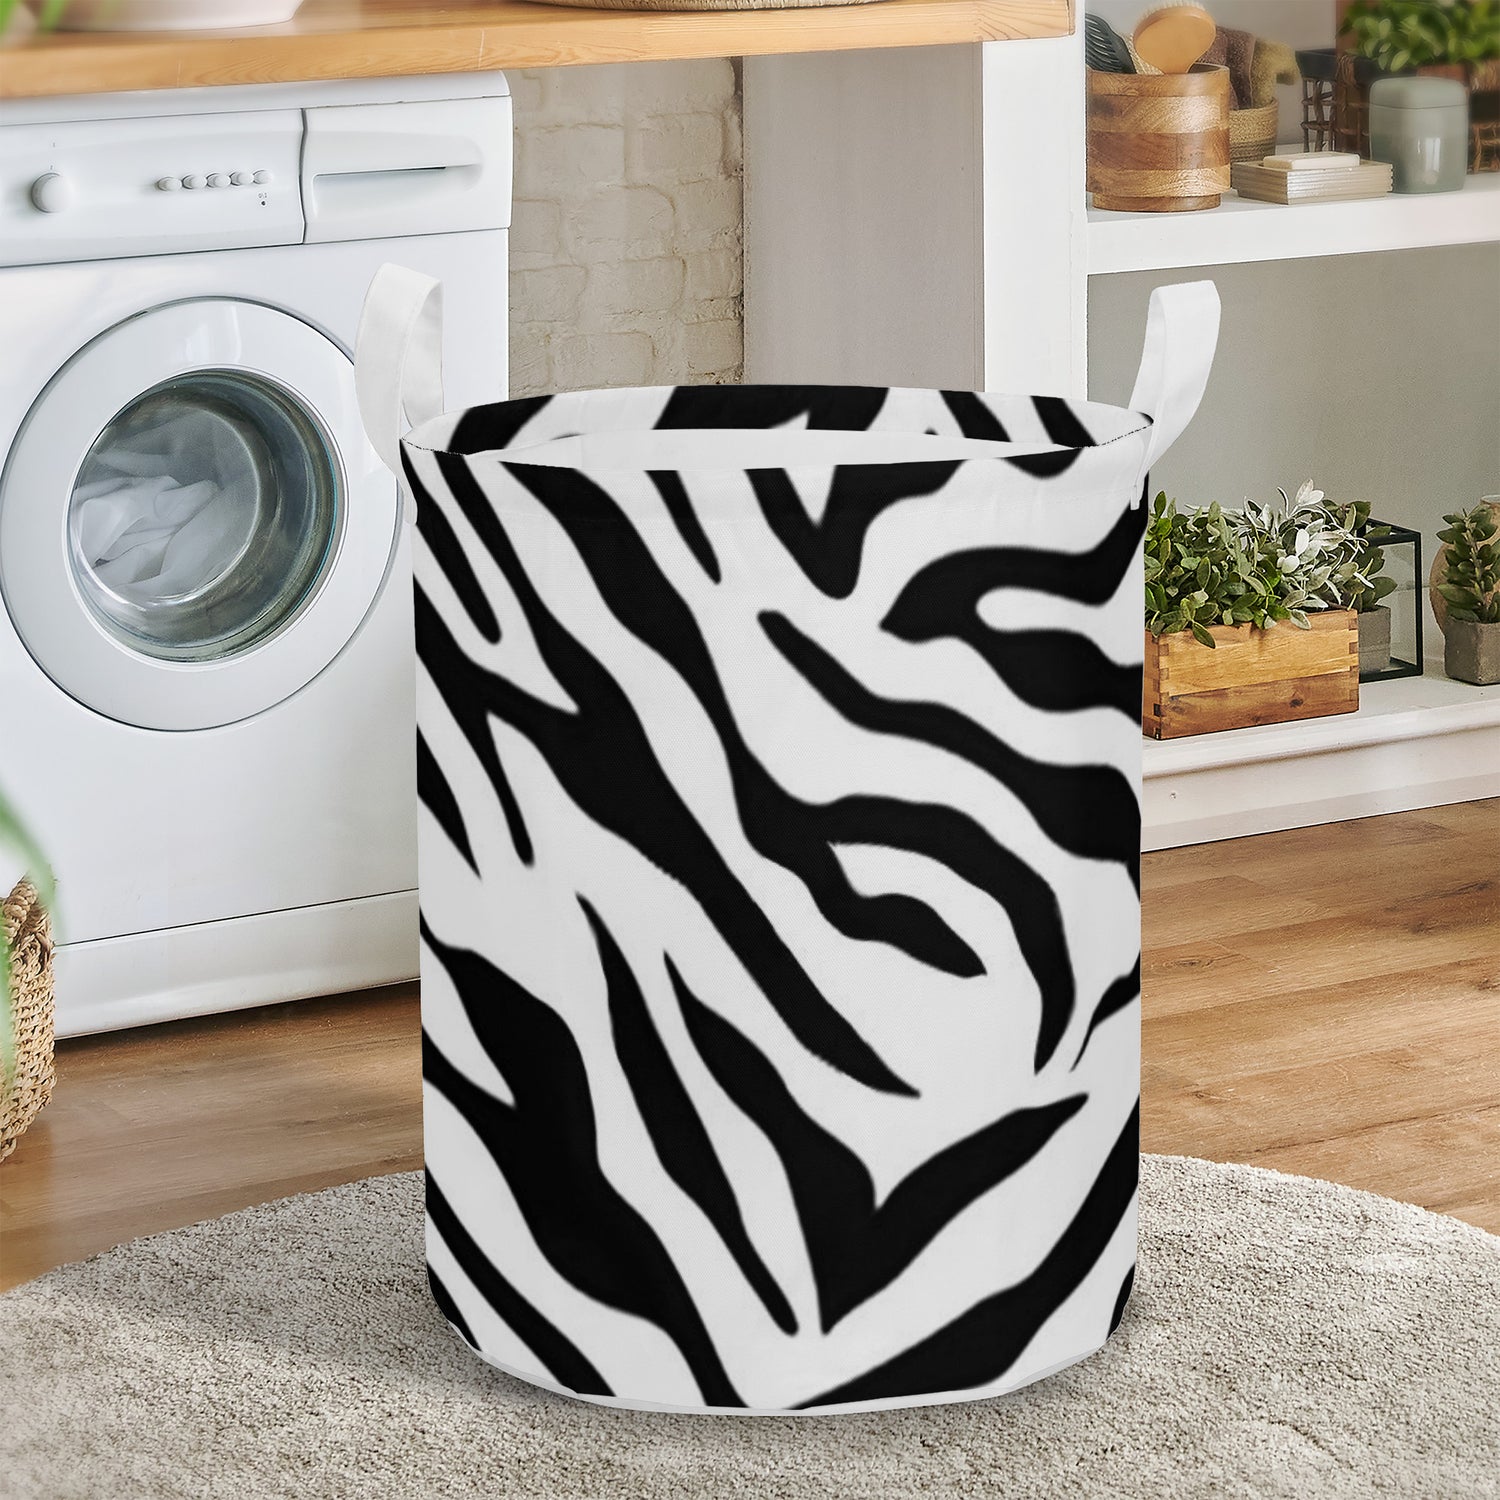 Round Laundry Basket Tiger black white Home-clothes-jewelry